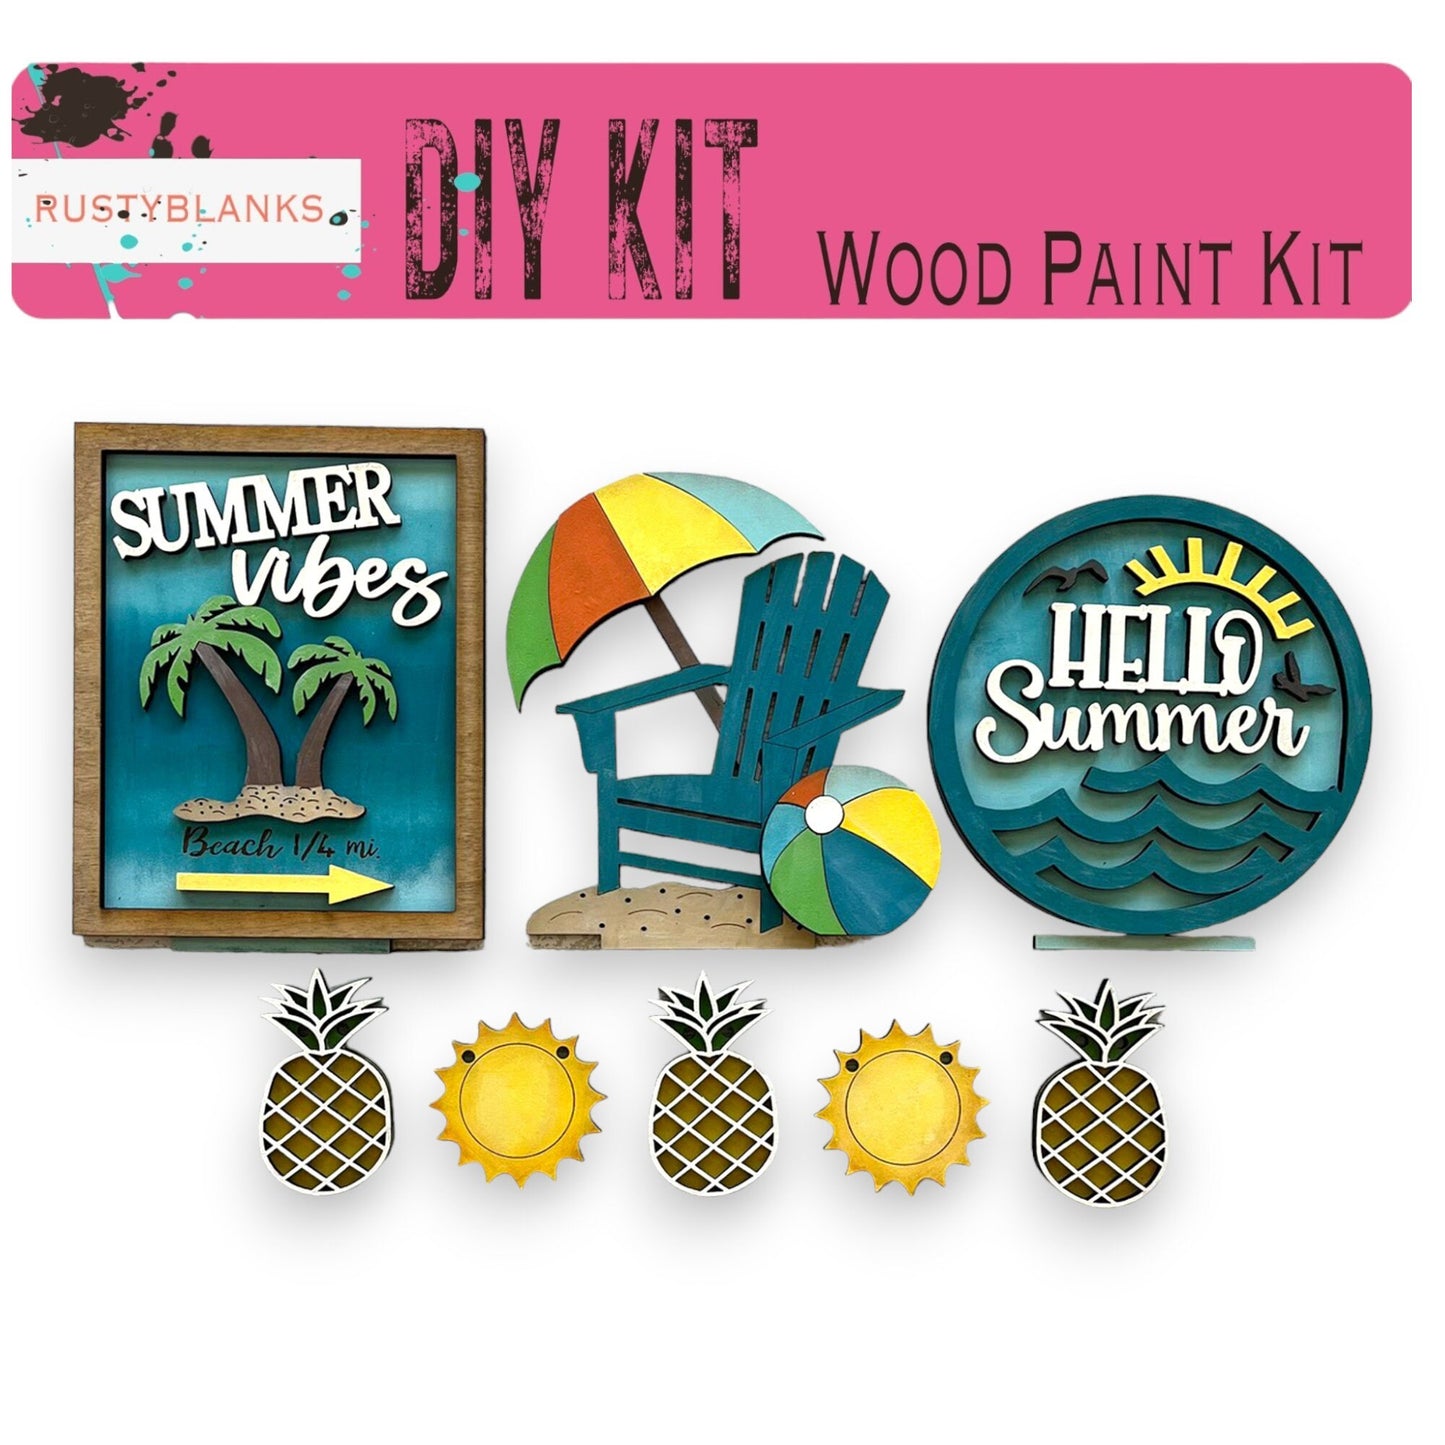 a wooden paint kit with a beach scene